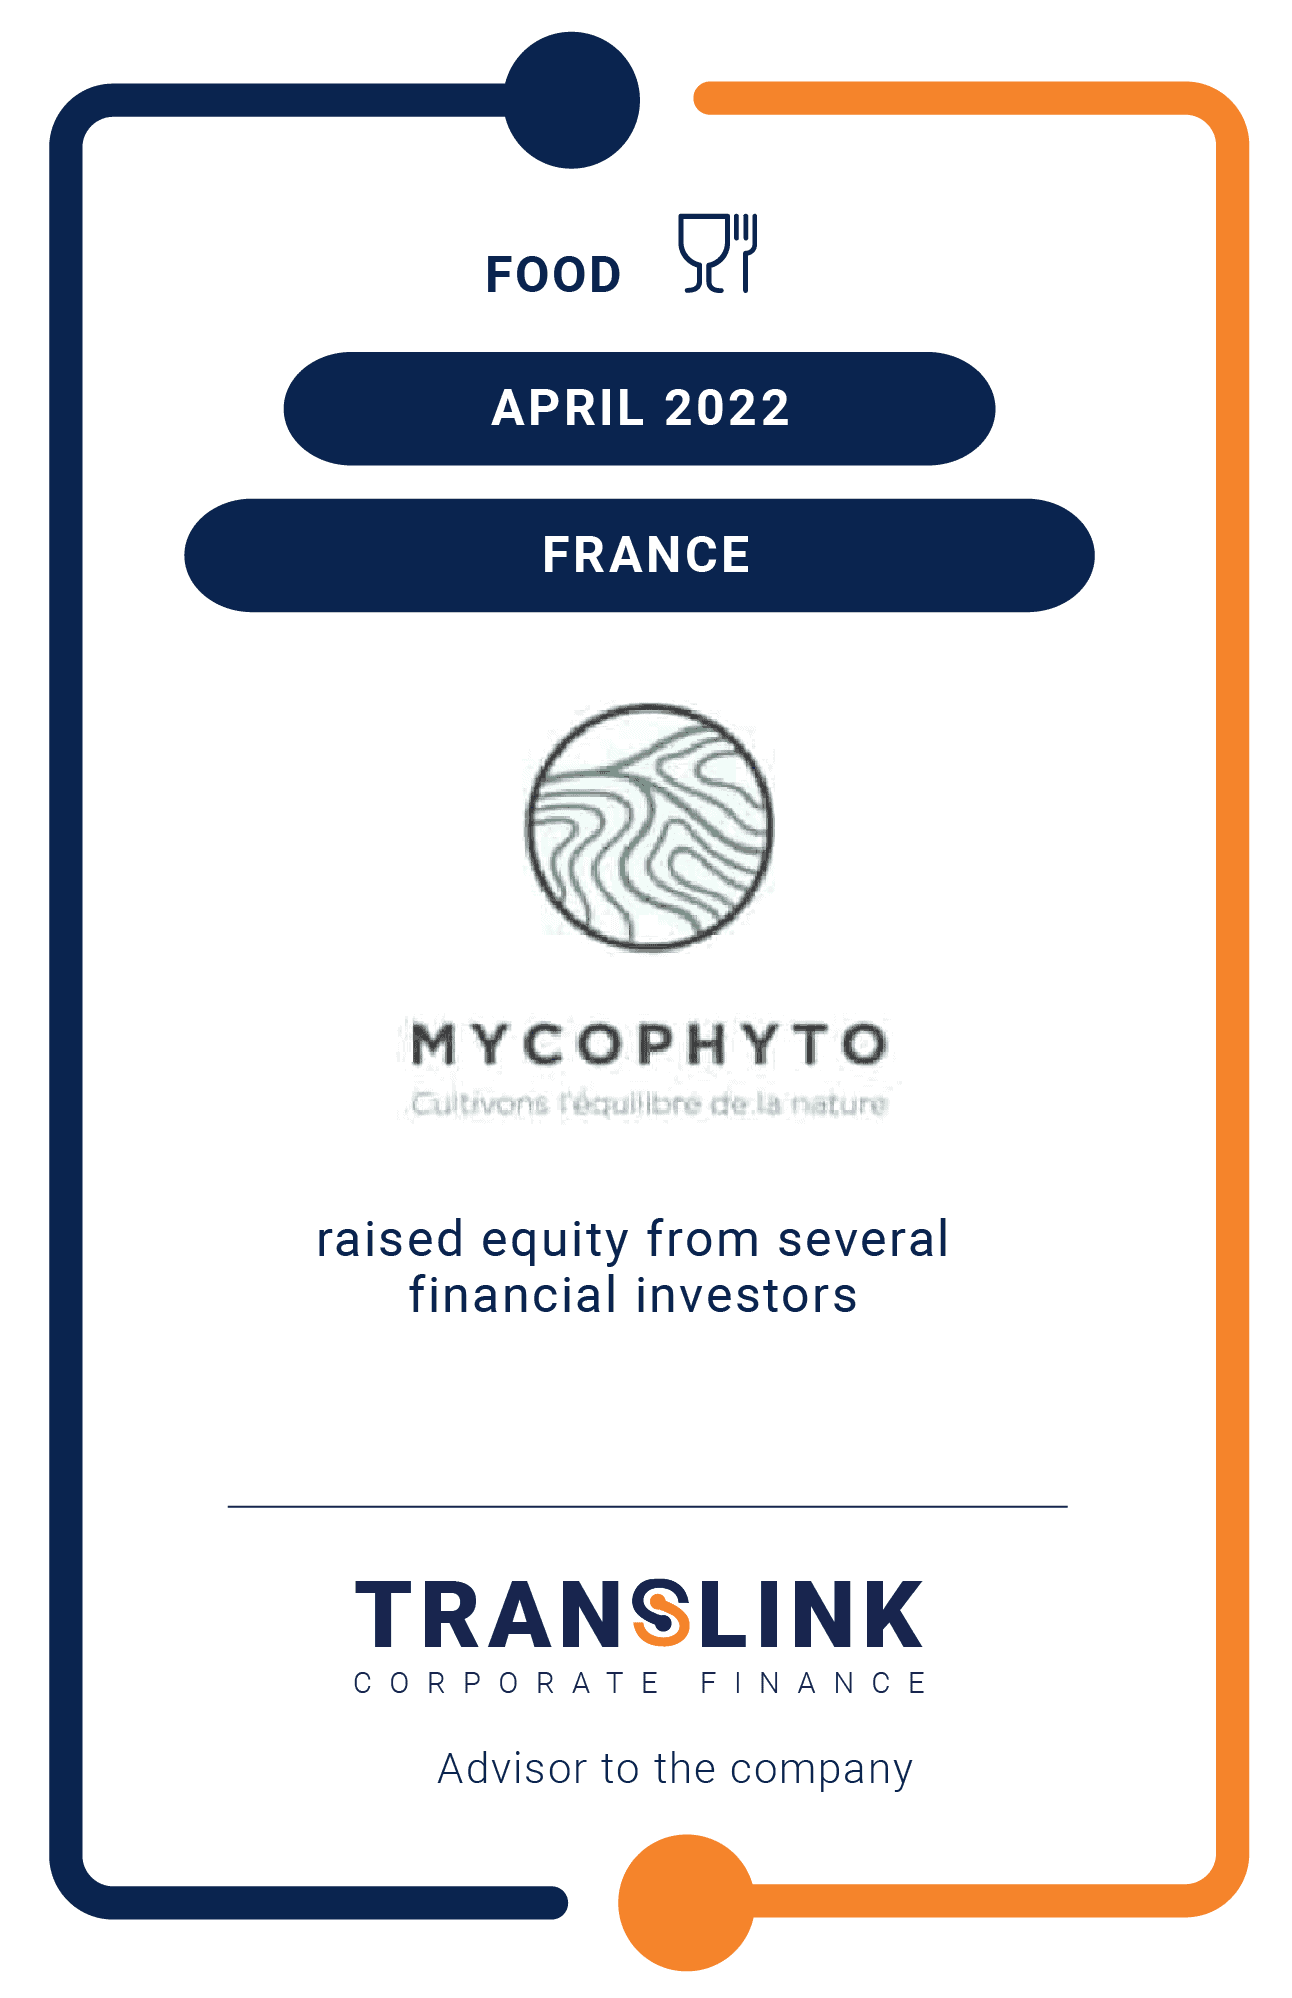 Translink Corporate Finance acted as the advisor to Mycophyto on the raising of equity from several financial investors